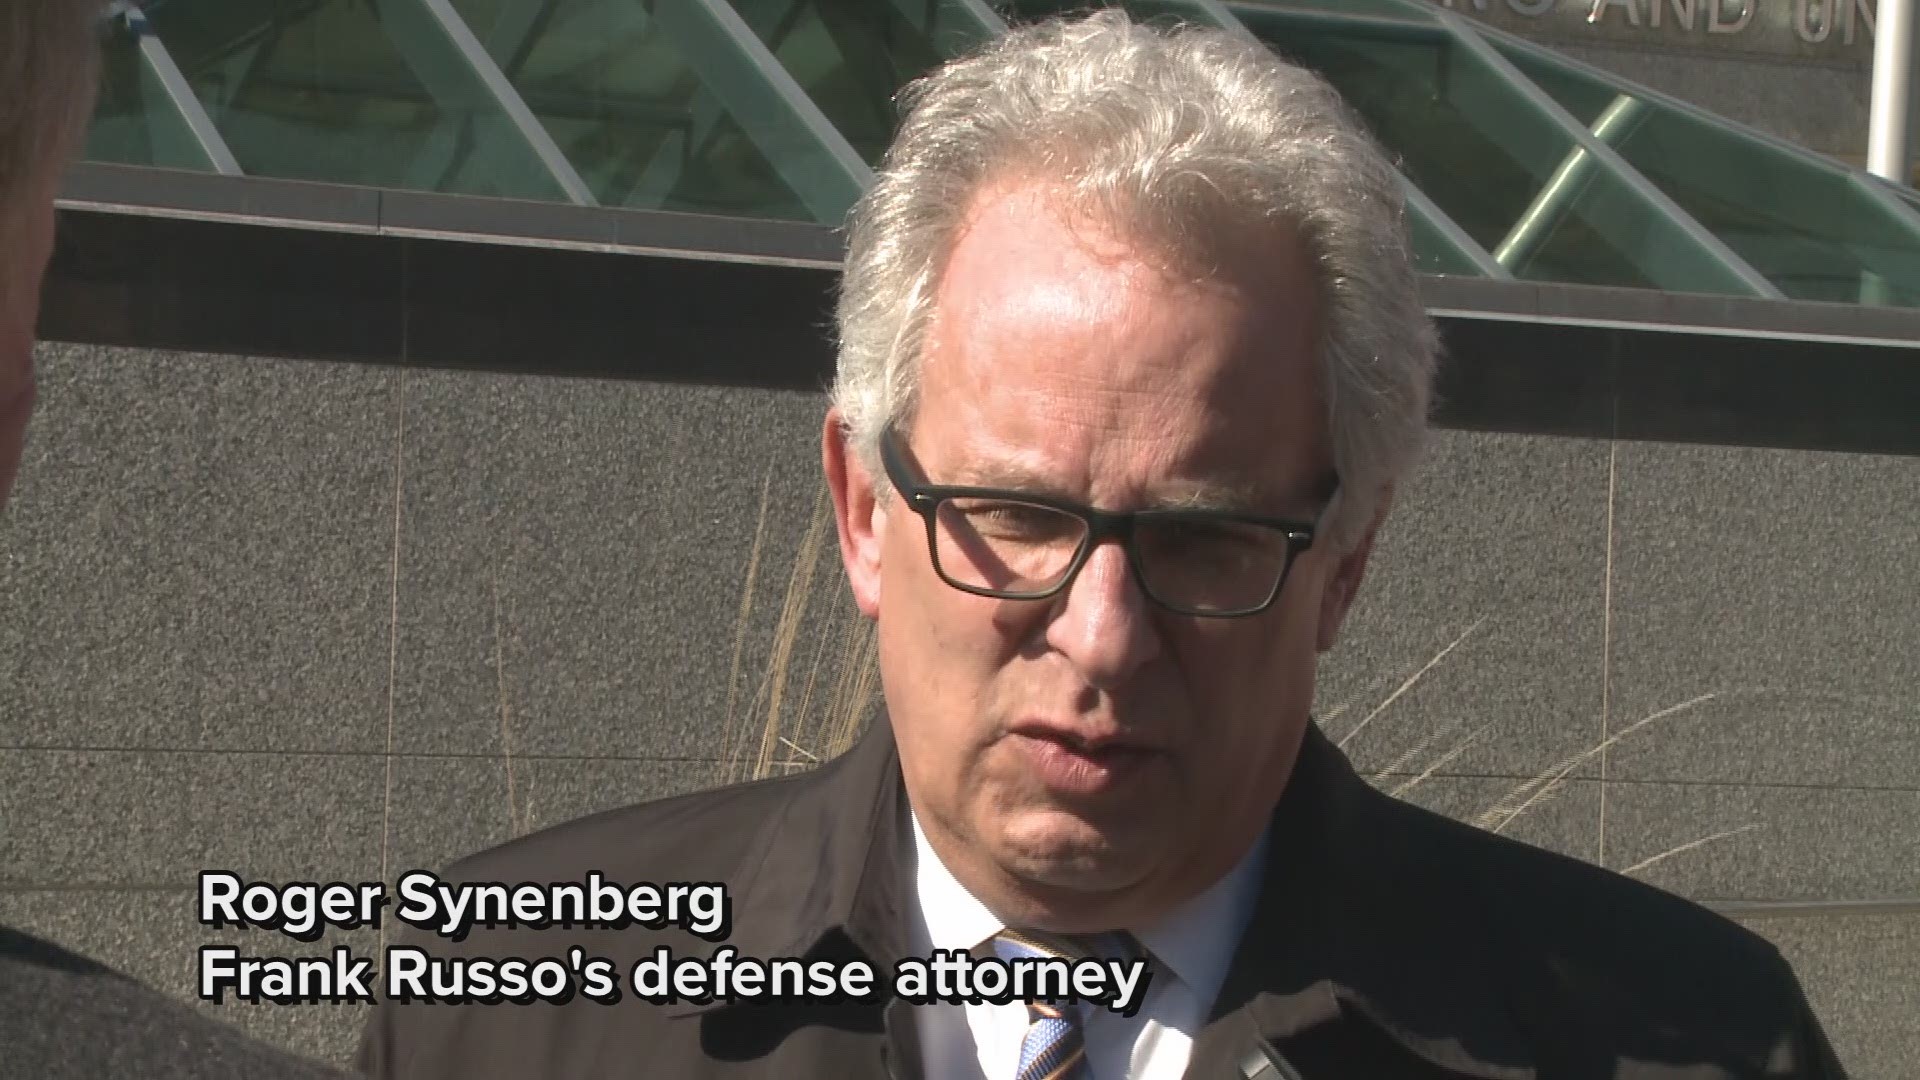 Russo saw his sentence reduced due to his cooperation in the Cuyahoga County corruption probe that put Jimmy Dimora behind bars.